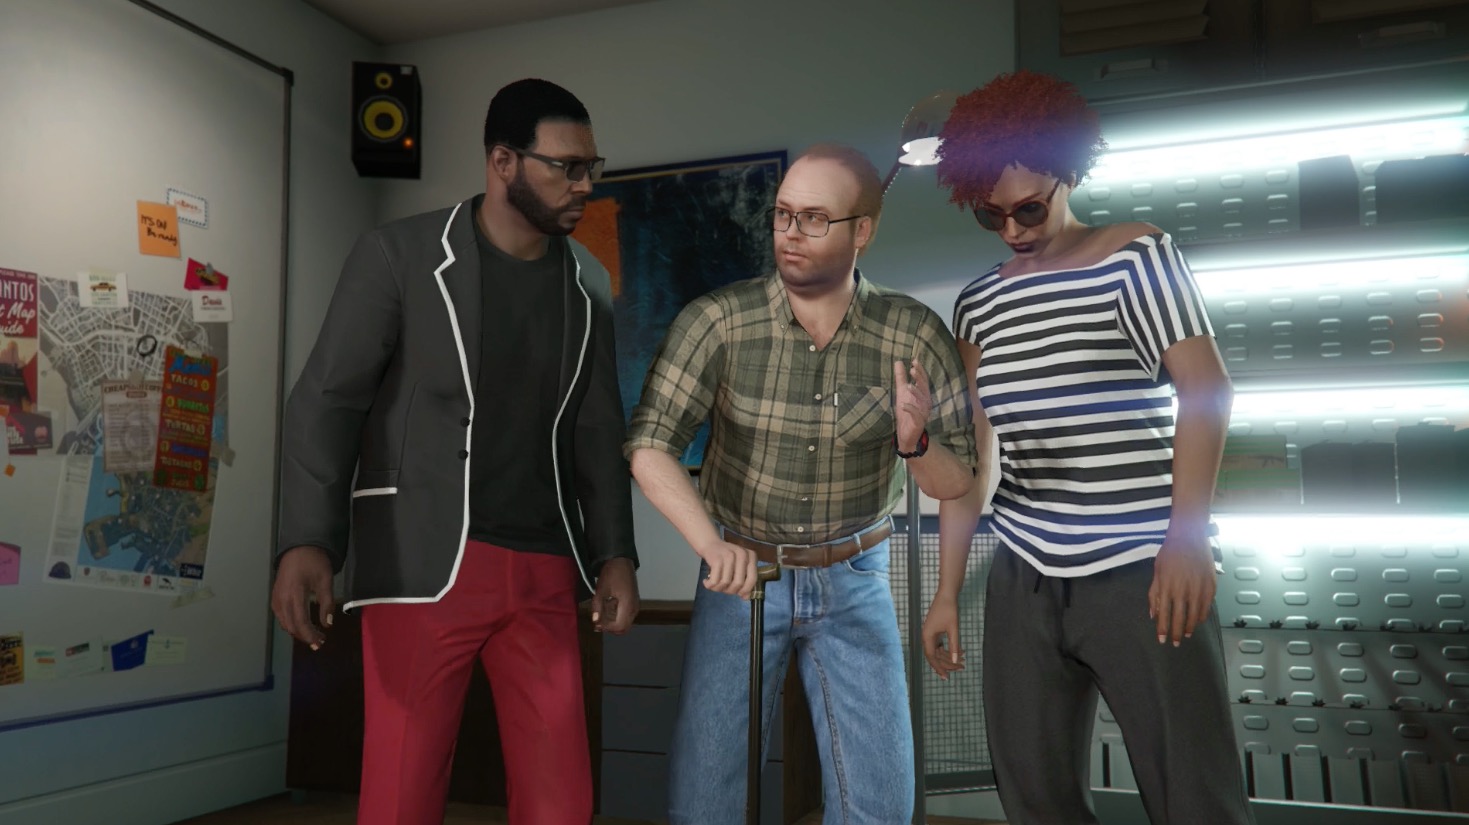 The Good (And Bad) Of GTA V’s New Online Heists